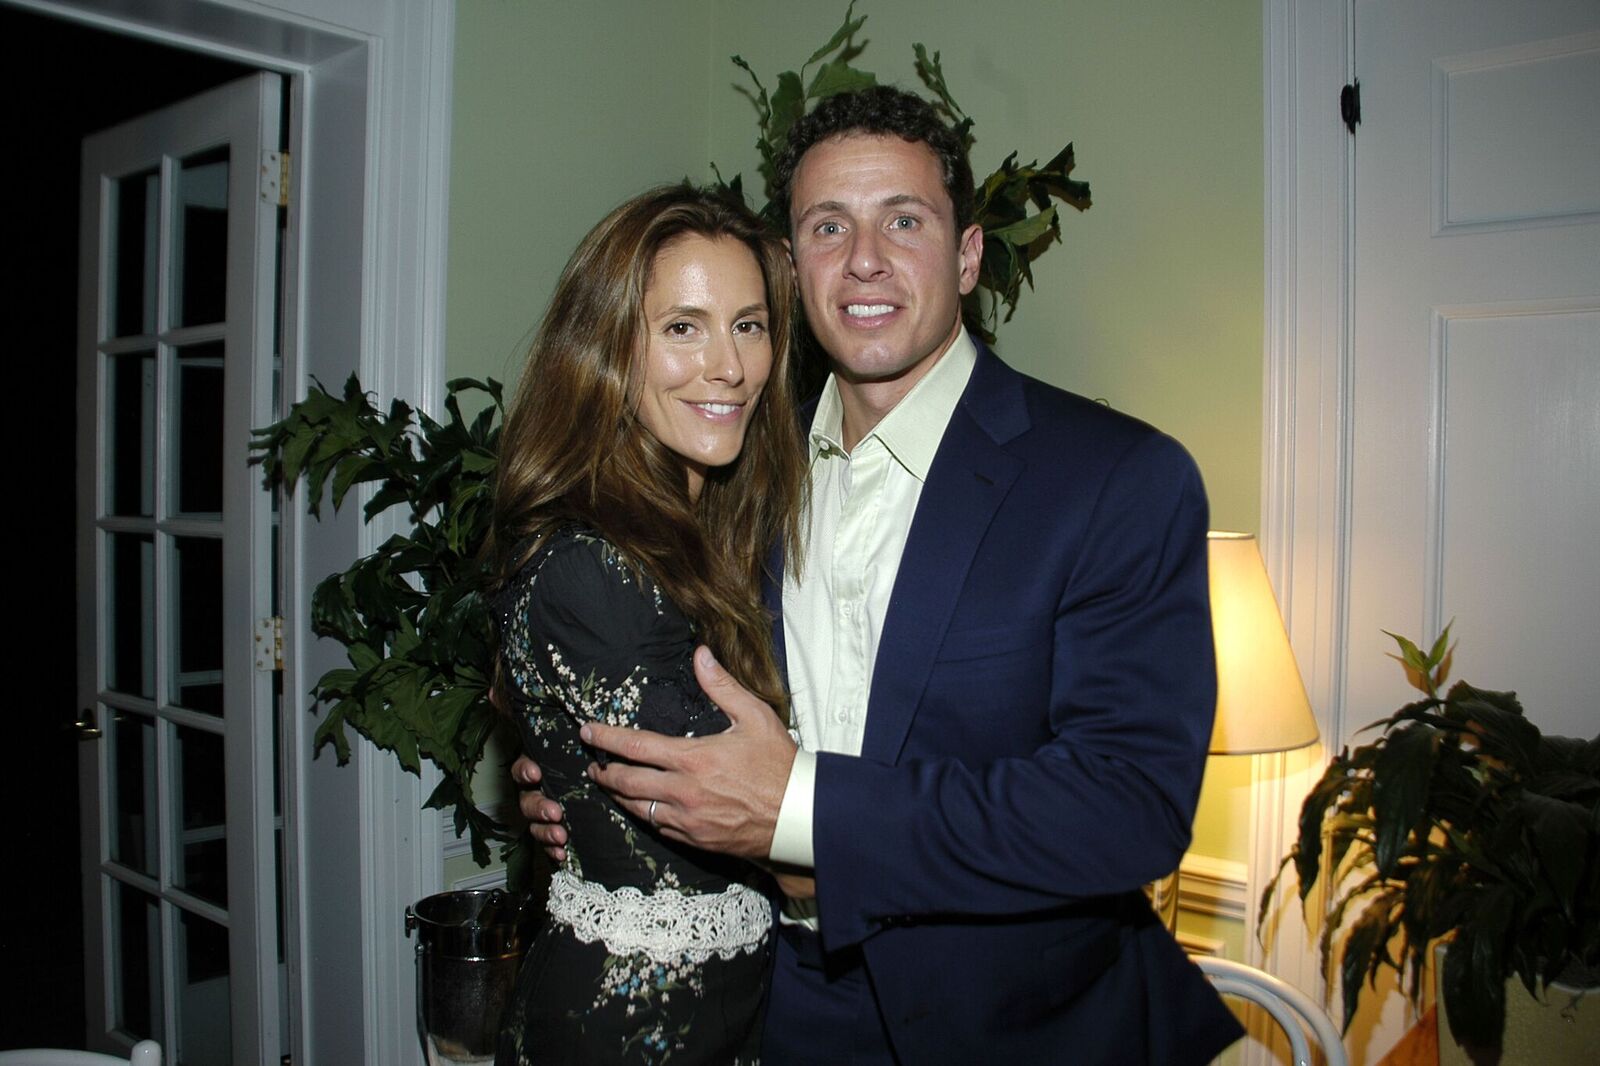 Cristina Greeven and Chris Cuomo at NATURA BISSE Dinner in honor of Greeven's ambassadorship of the skin products on August 17, 2007, in Southampton, New York | Photo: Getty Images